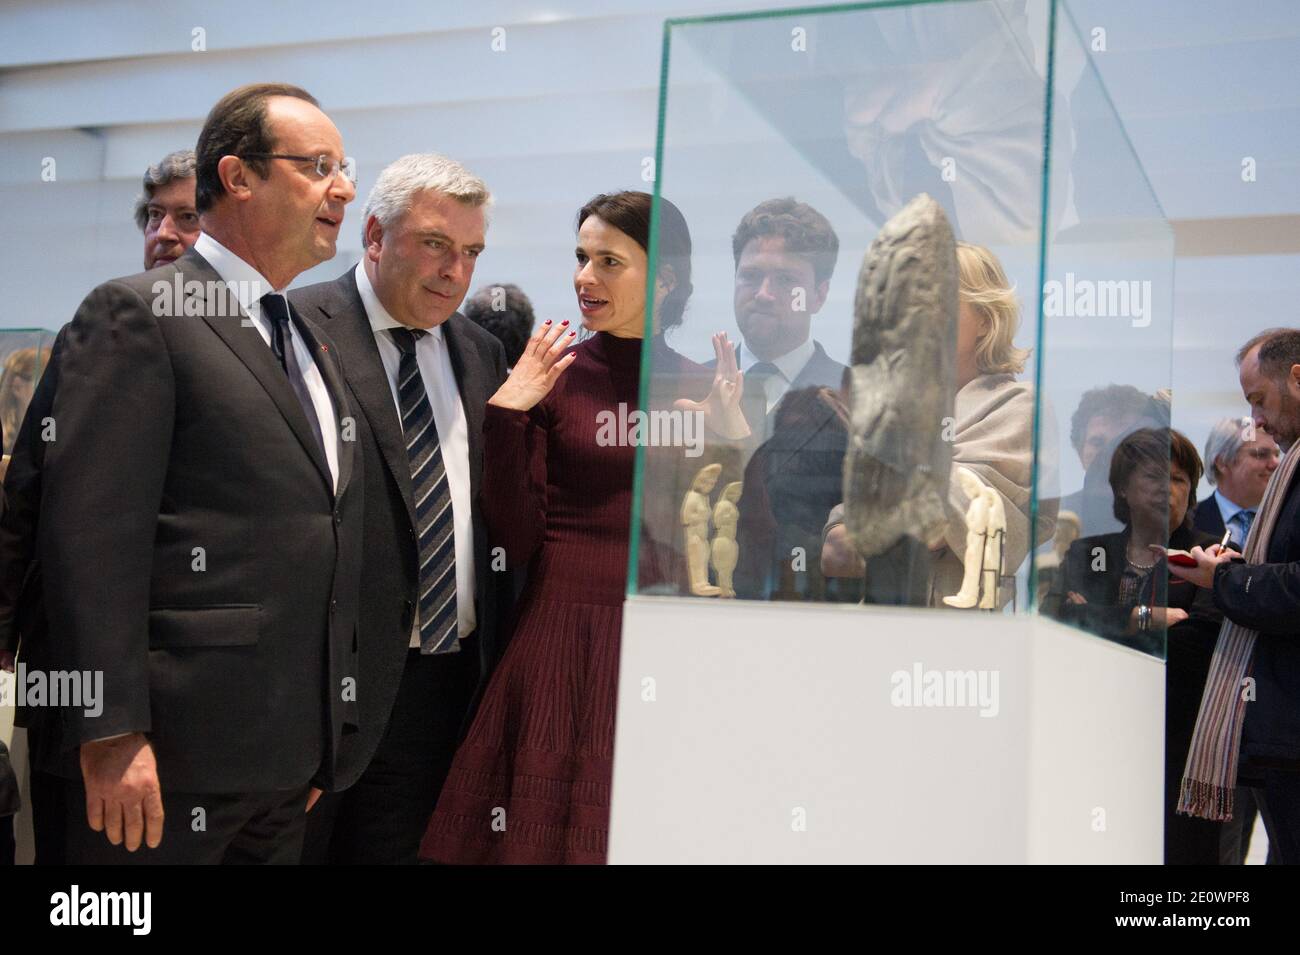 French President Francois Hollande is seen with Aurelie Filippetti, Valerie  Trierweiler and Martine Aubry during the inauguration of the Louvre-Lens  Museum in Lens, North of France, on December 4, 2012. Photo by